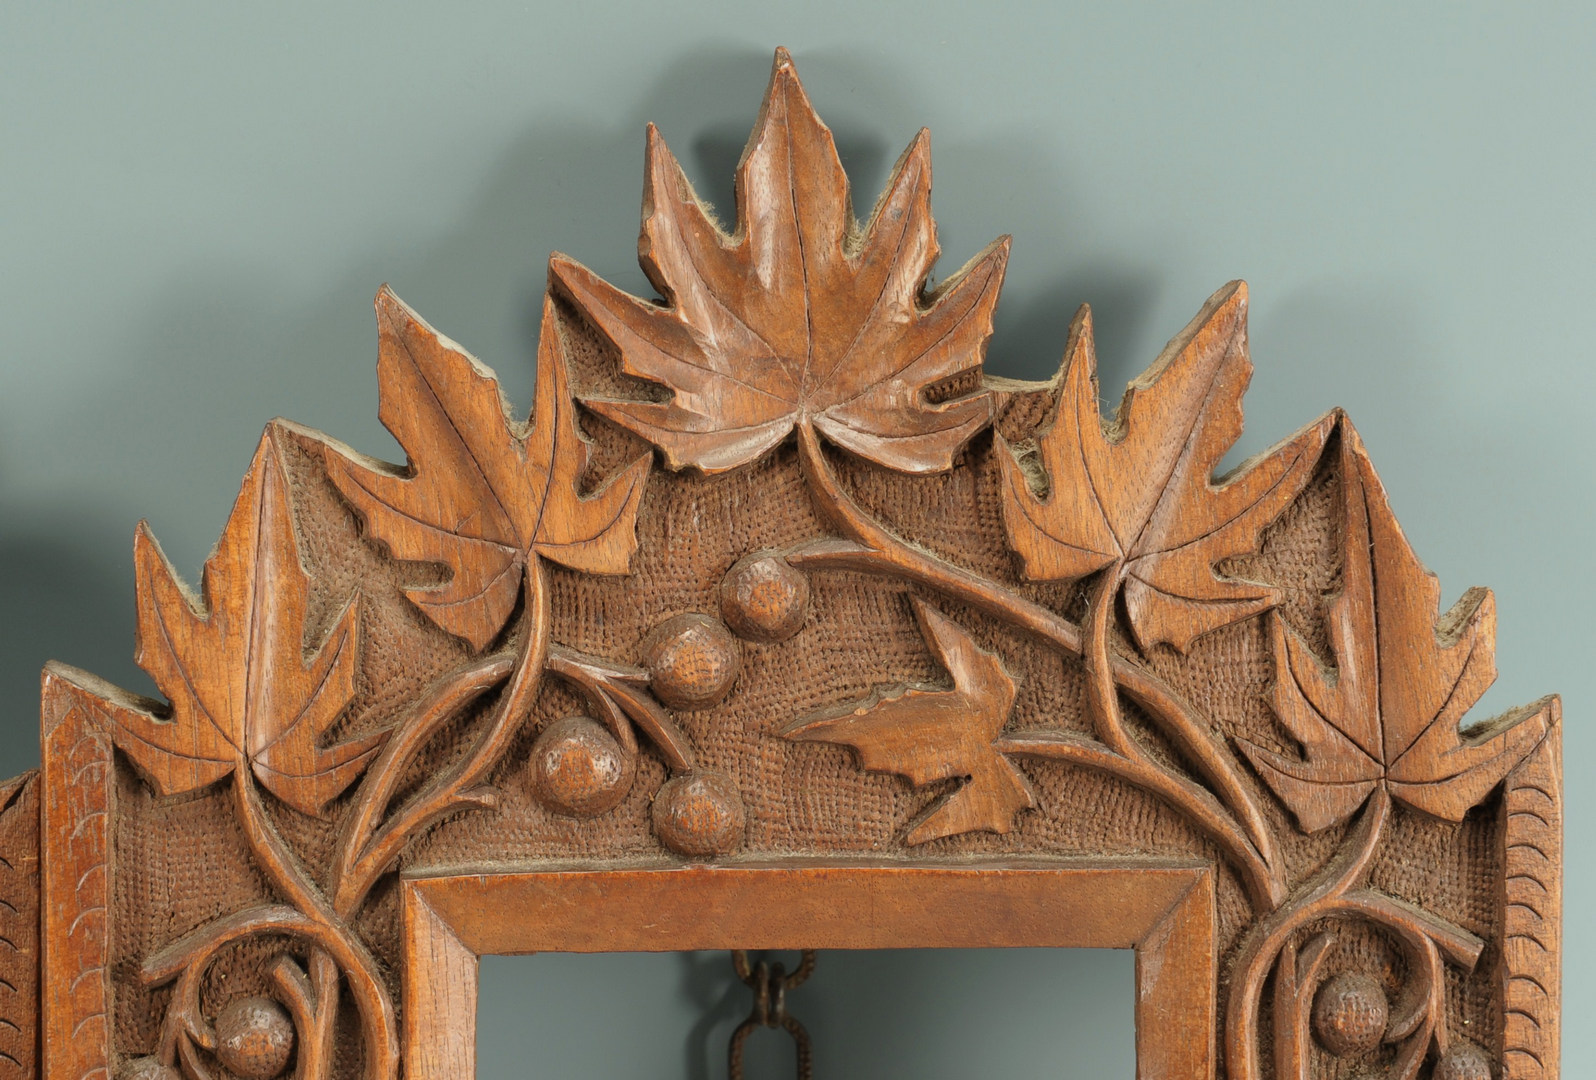 Lot 99: Pair Carved Frames Possibly Biltmore Industries